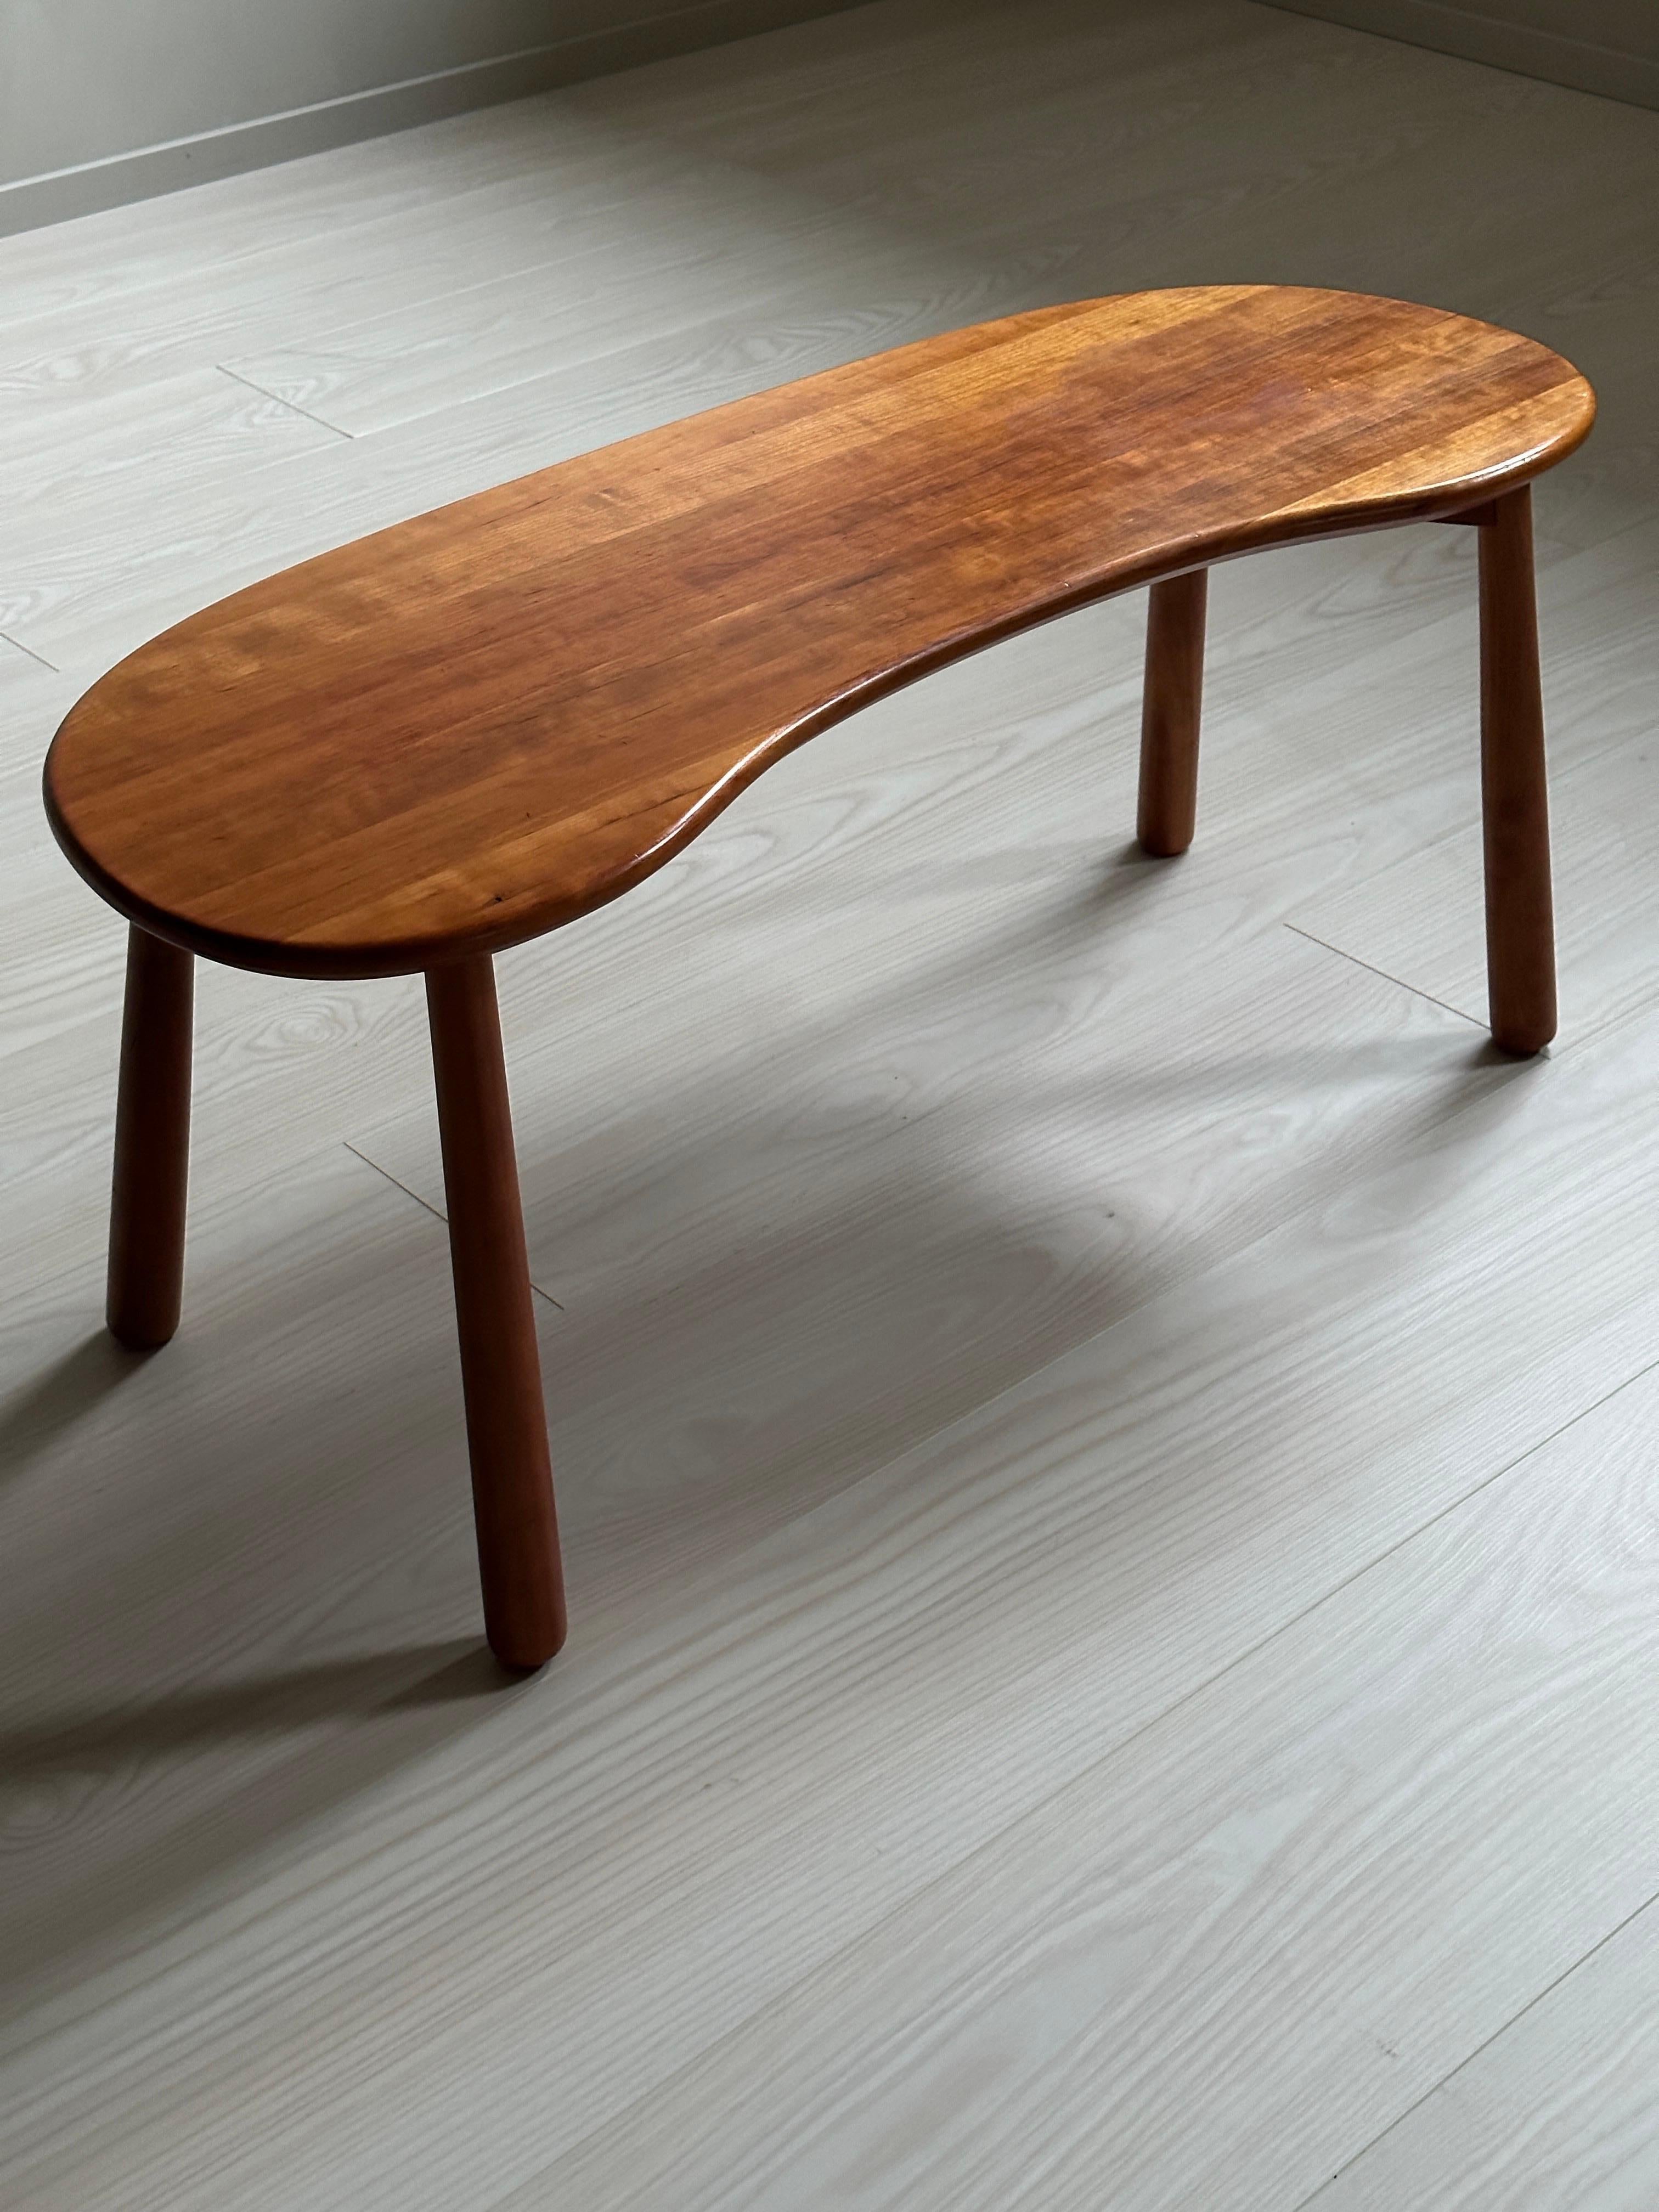 20th Century A Vintage Side Table in Mahogany by Josef Frank for Svenkt Tenn, Sweden 1970s For Sale